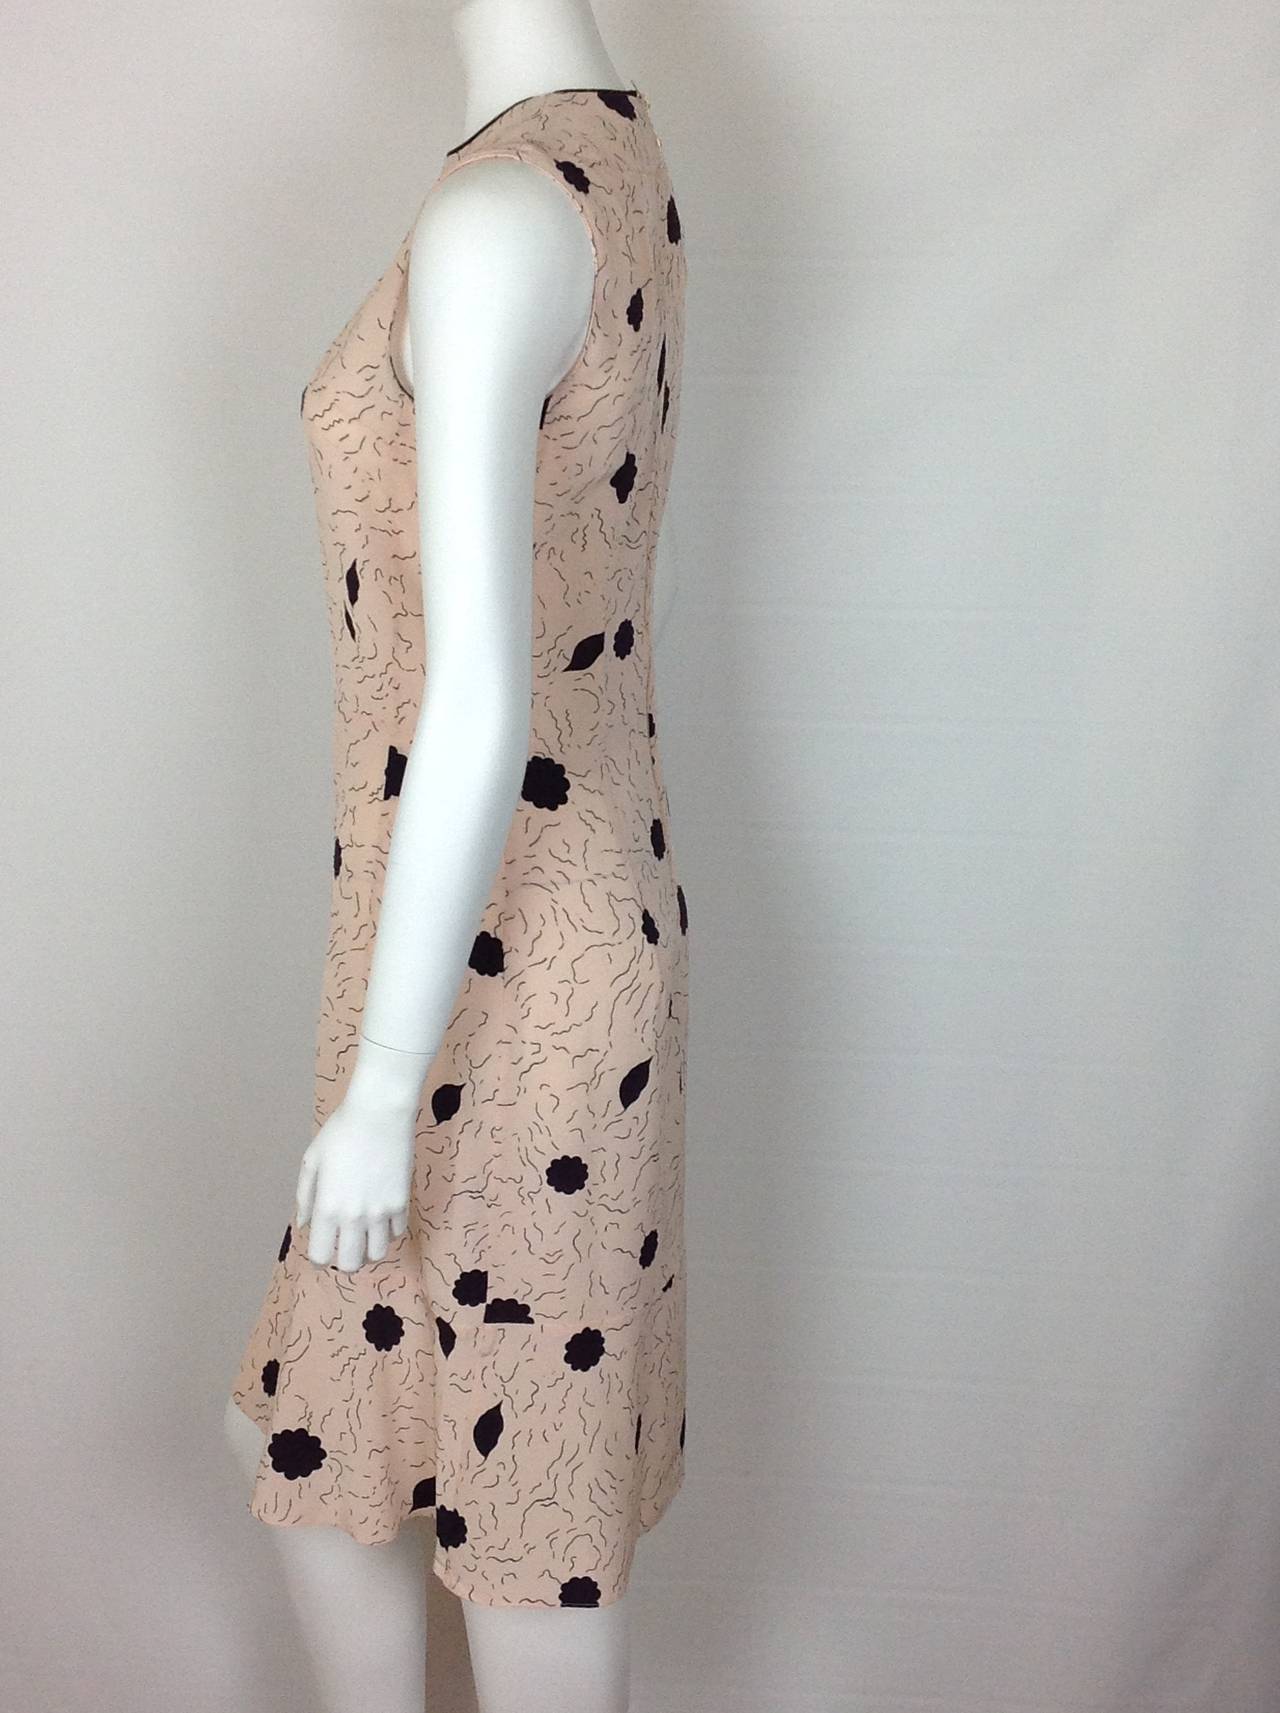 From summer 2014, Marni pink floral dress with 7 1/2